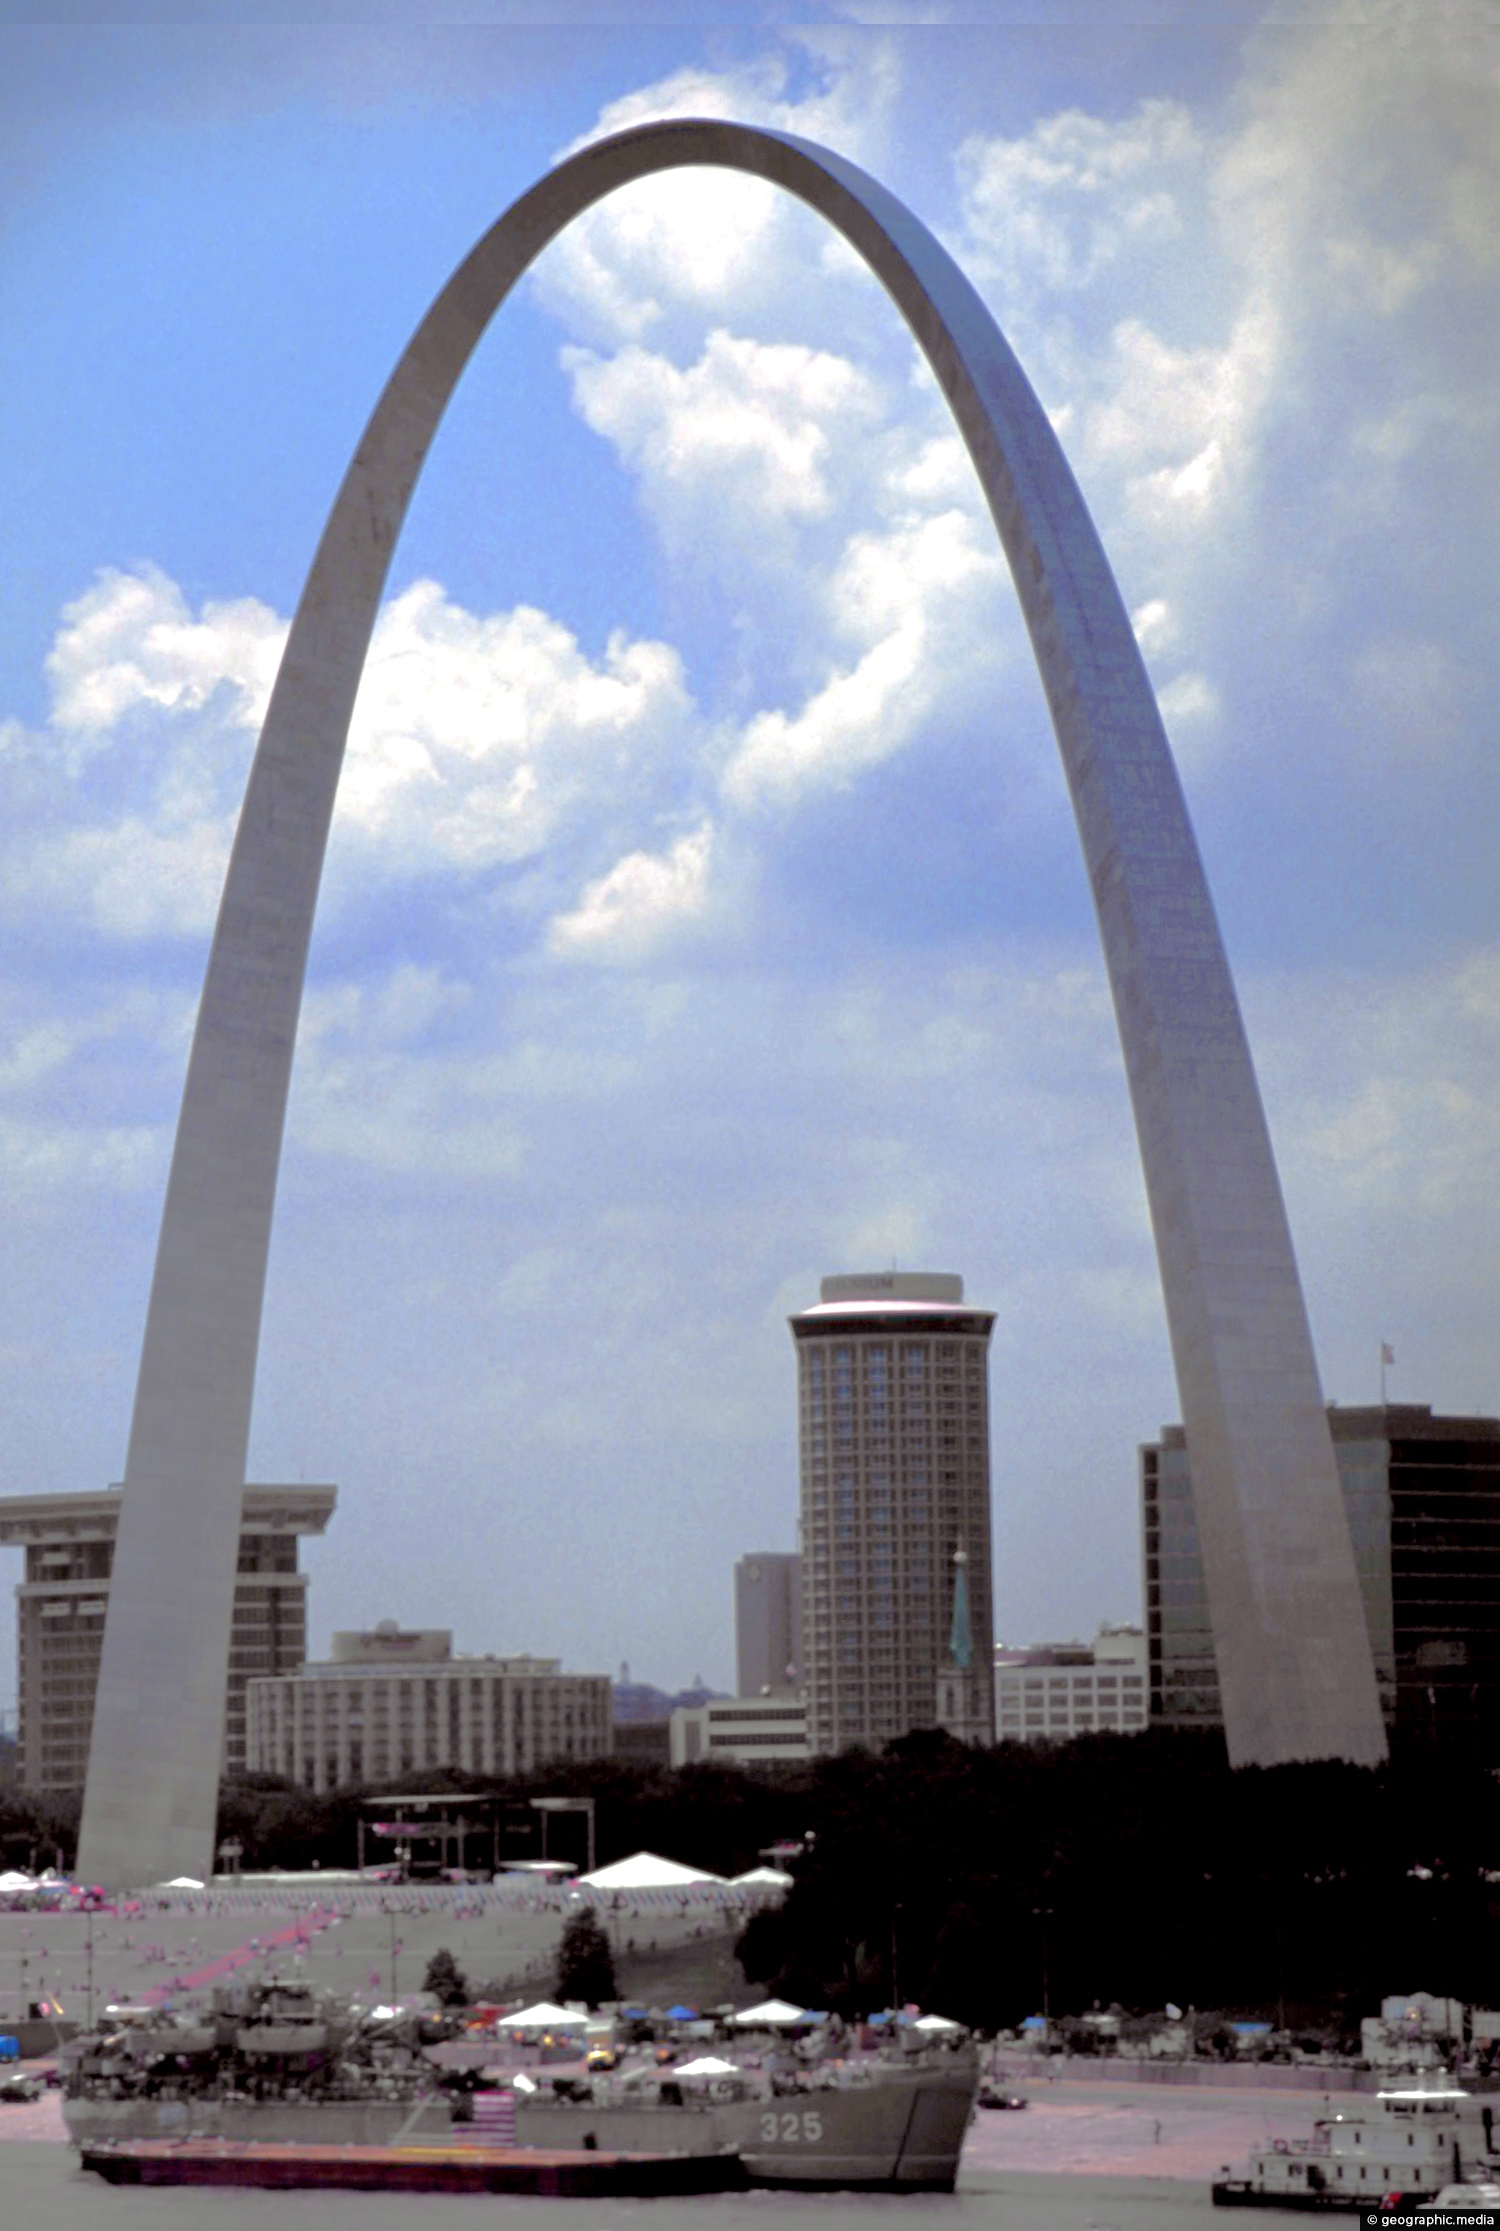 The Gateway Arch in St Louis Missouri | Geographic Media